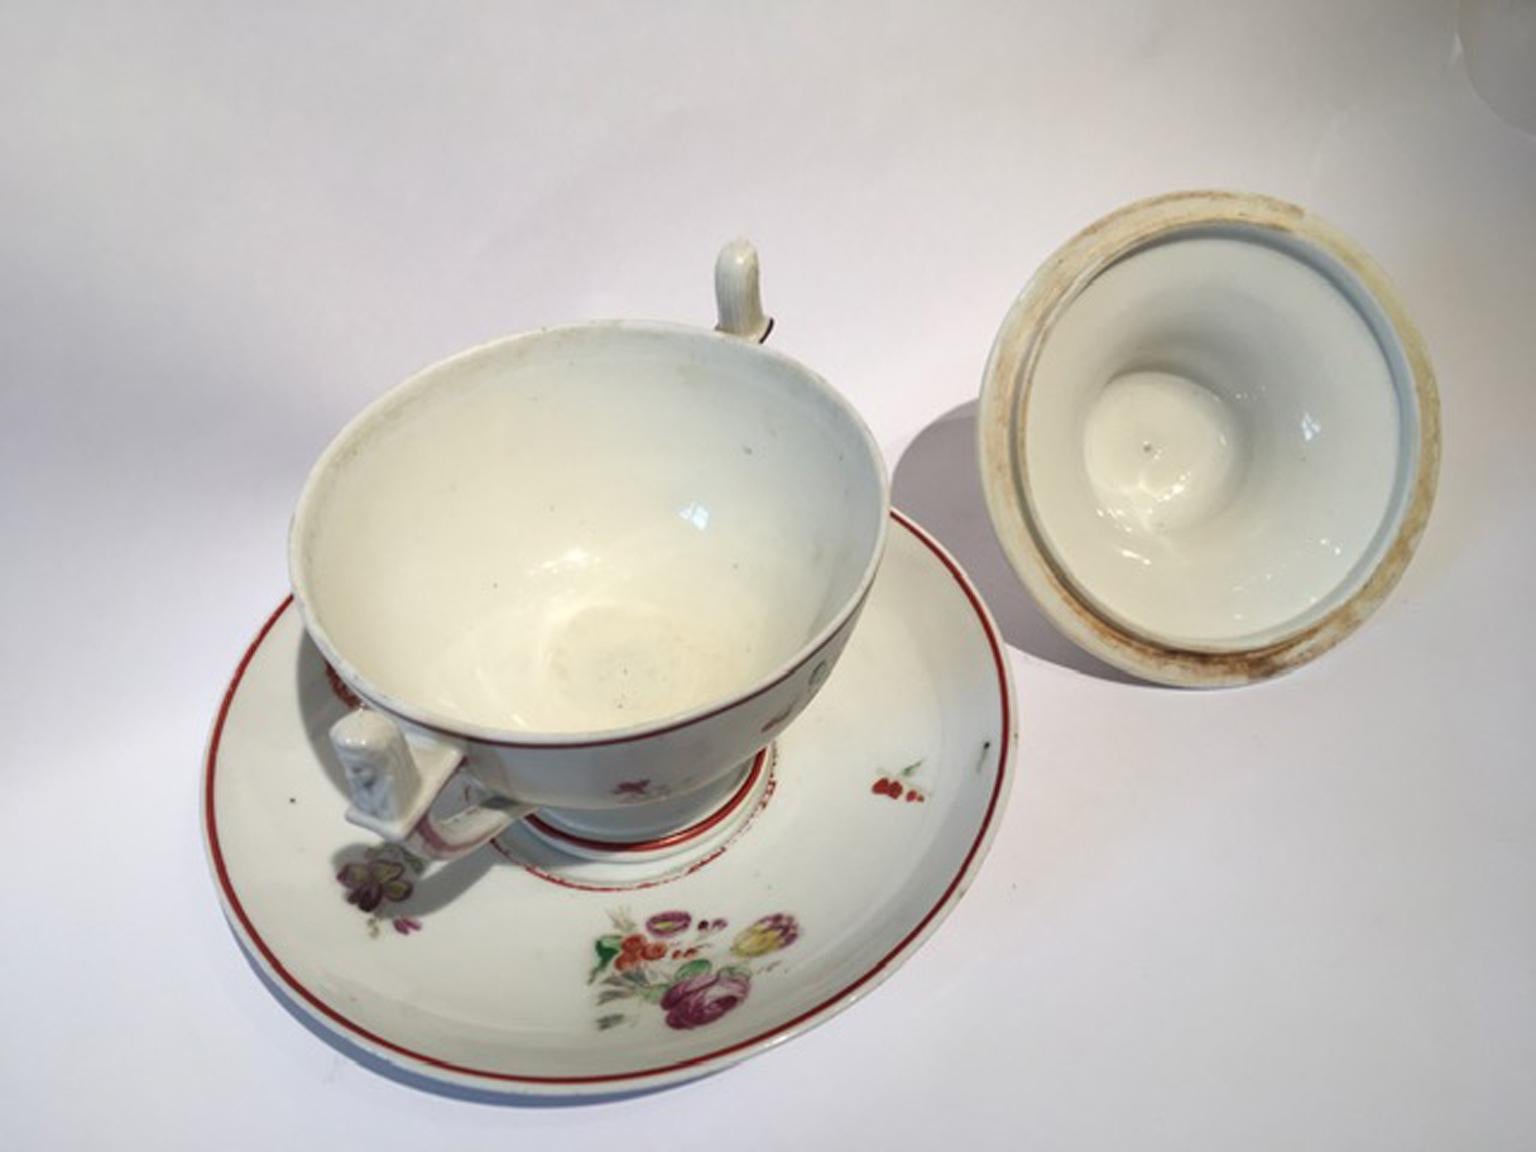 Italy 18th Century Richard Ginori Porcelain Sugar Bowl with Cover For Sale 2